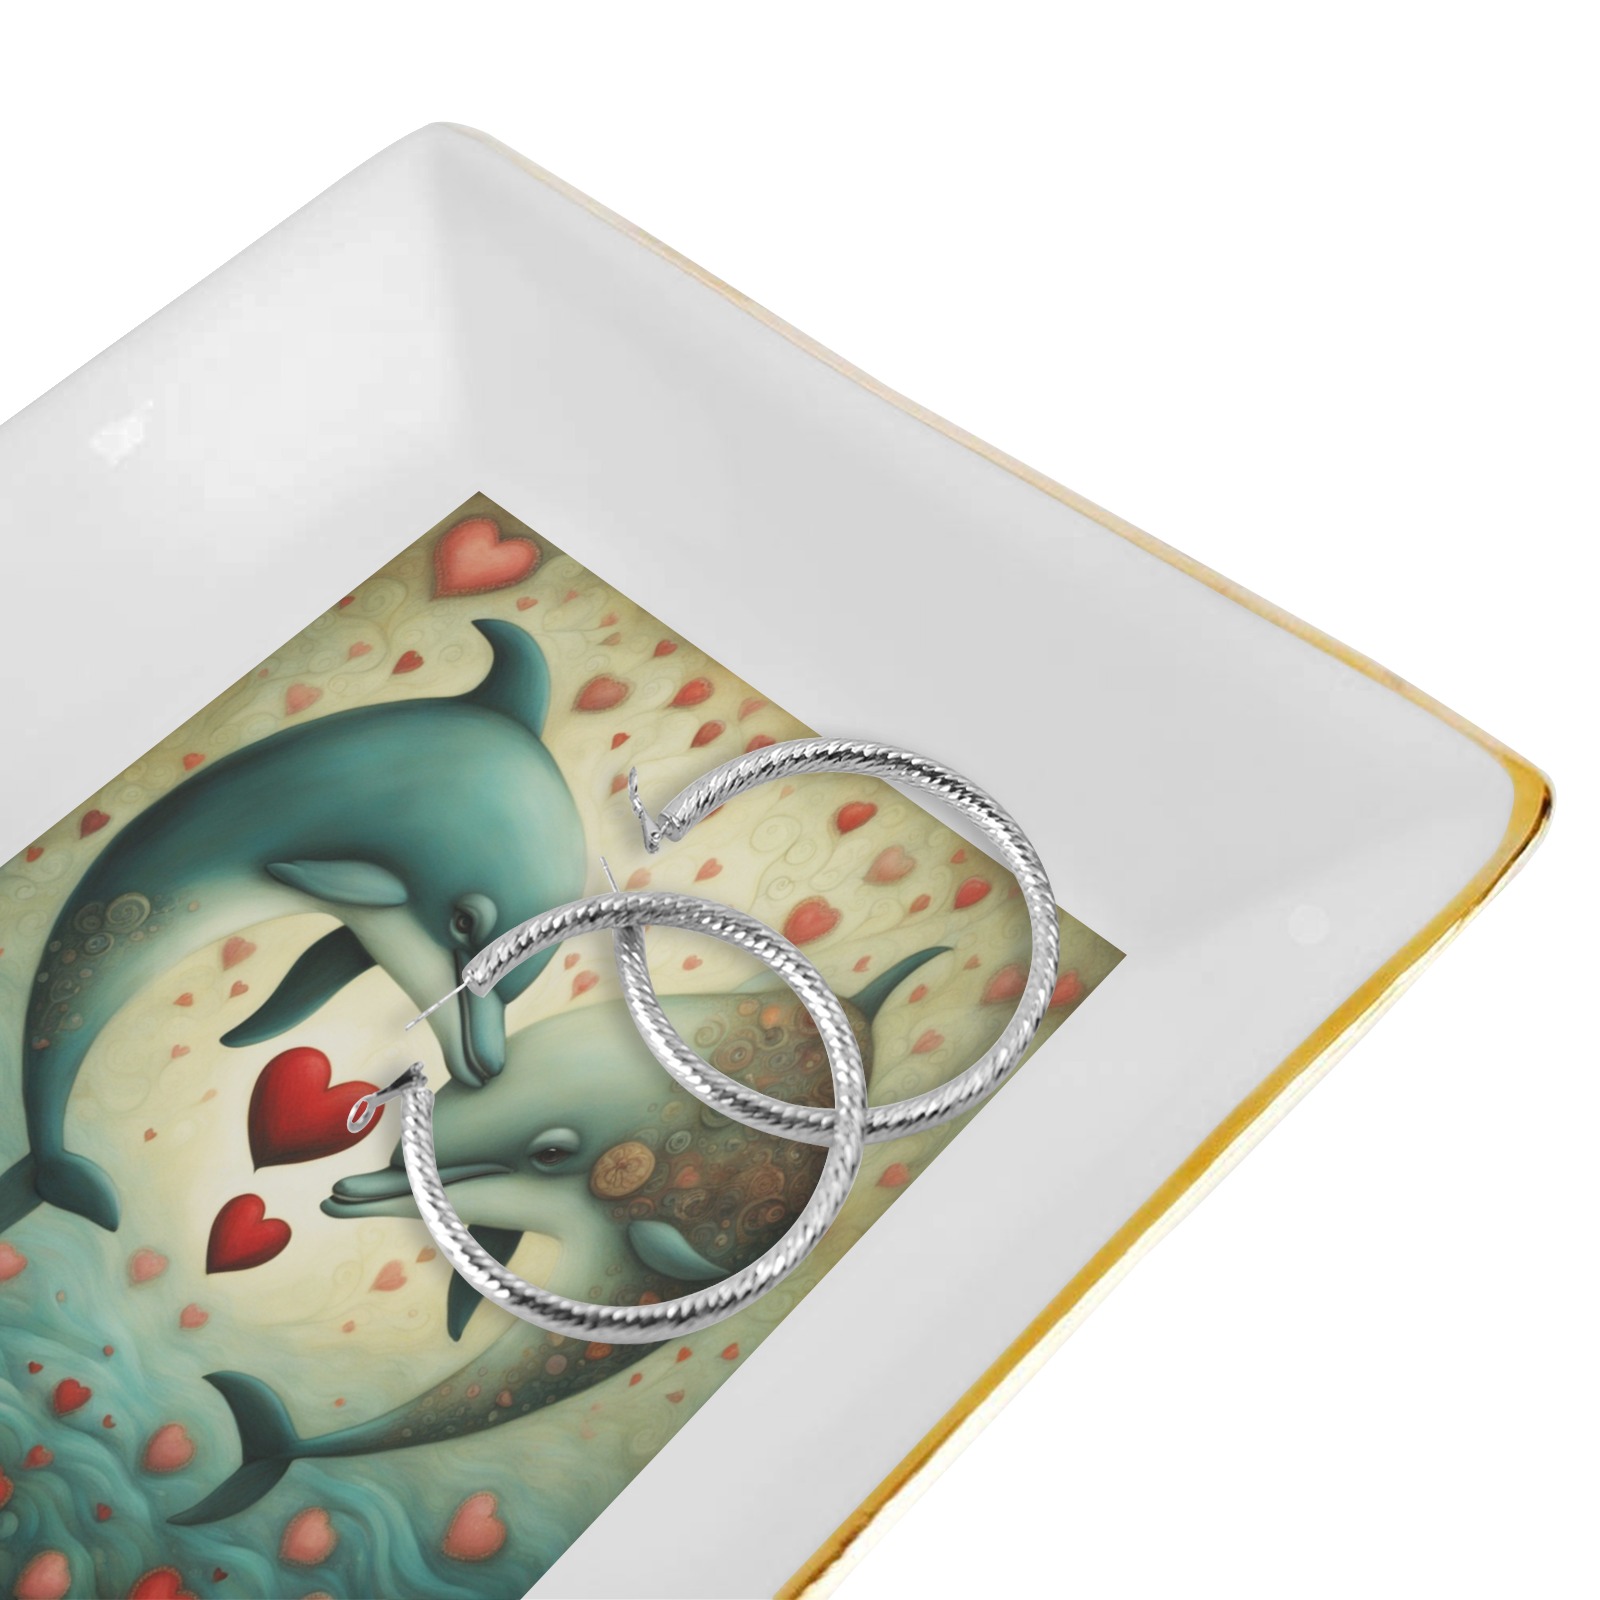 Dolphin Love 2 Square Jewelry Tray with Golden Edge